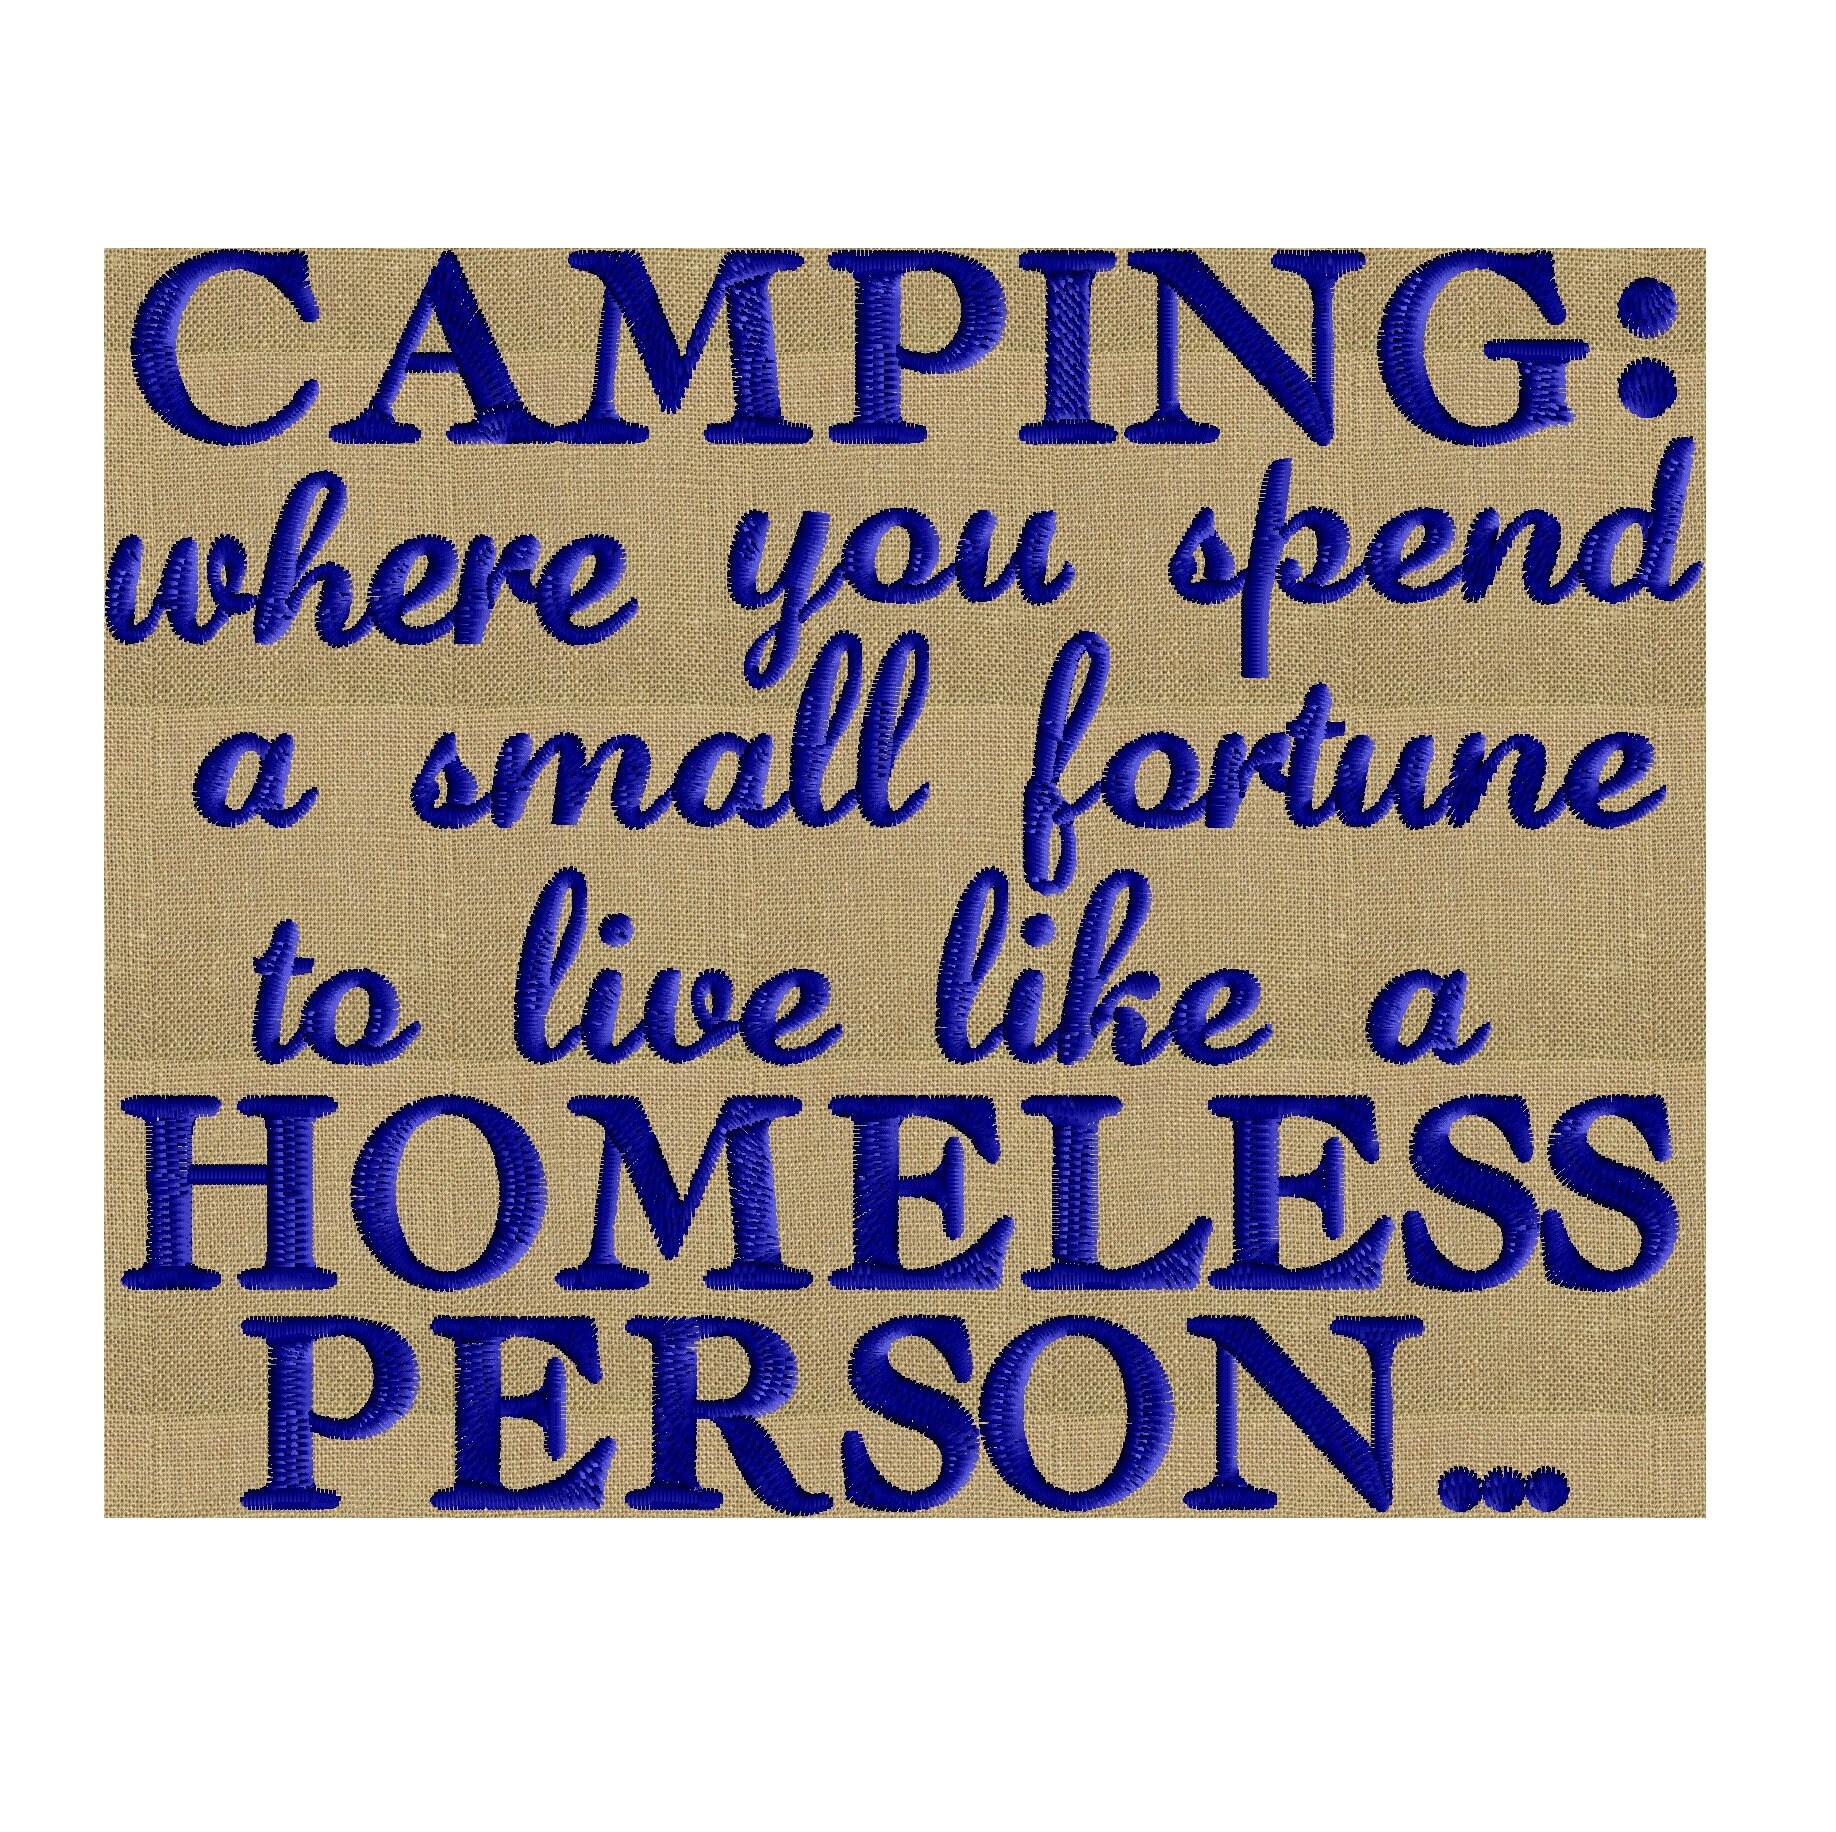 Camping When You Spend A Small Fortune To Live Like A Homeless Person -  Personalized Camping Doormat, Camping Gift – JonxiFon